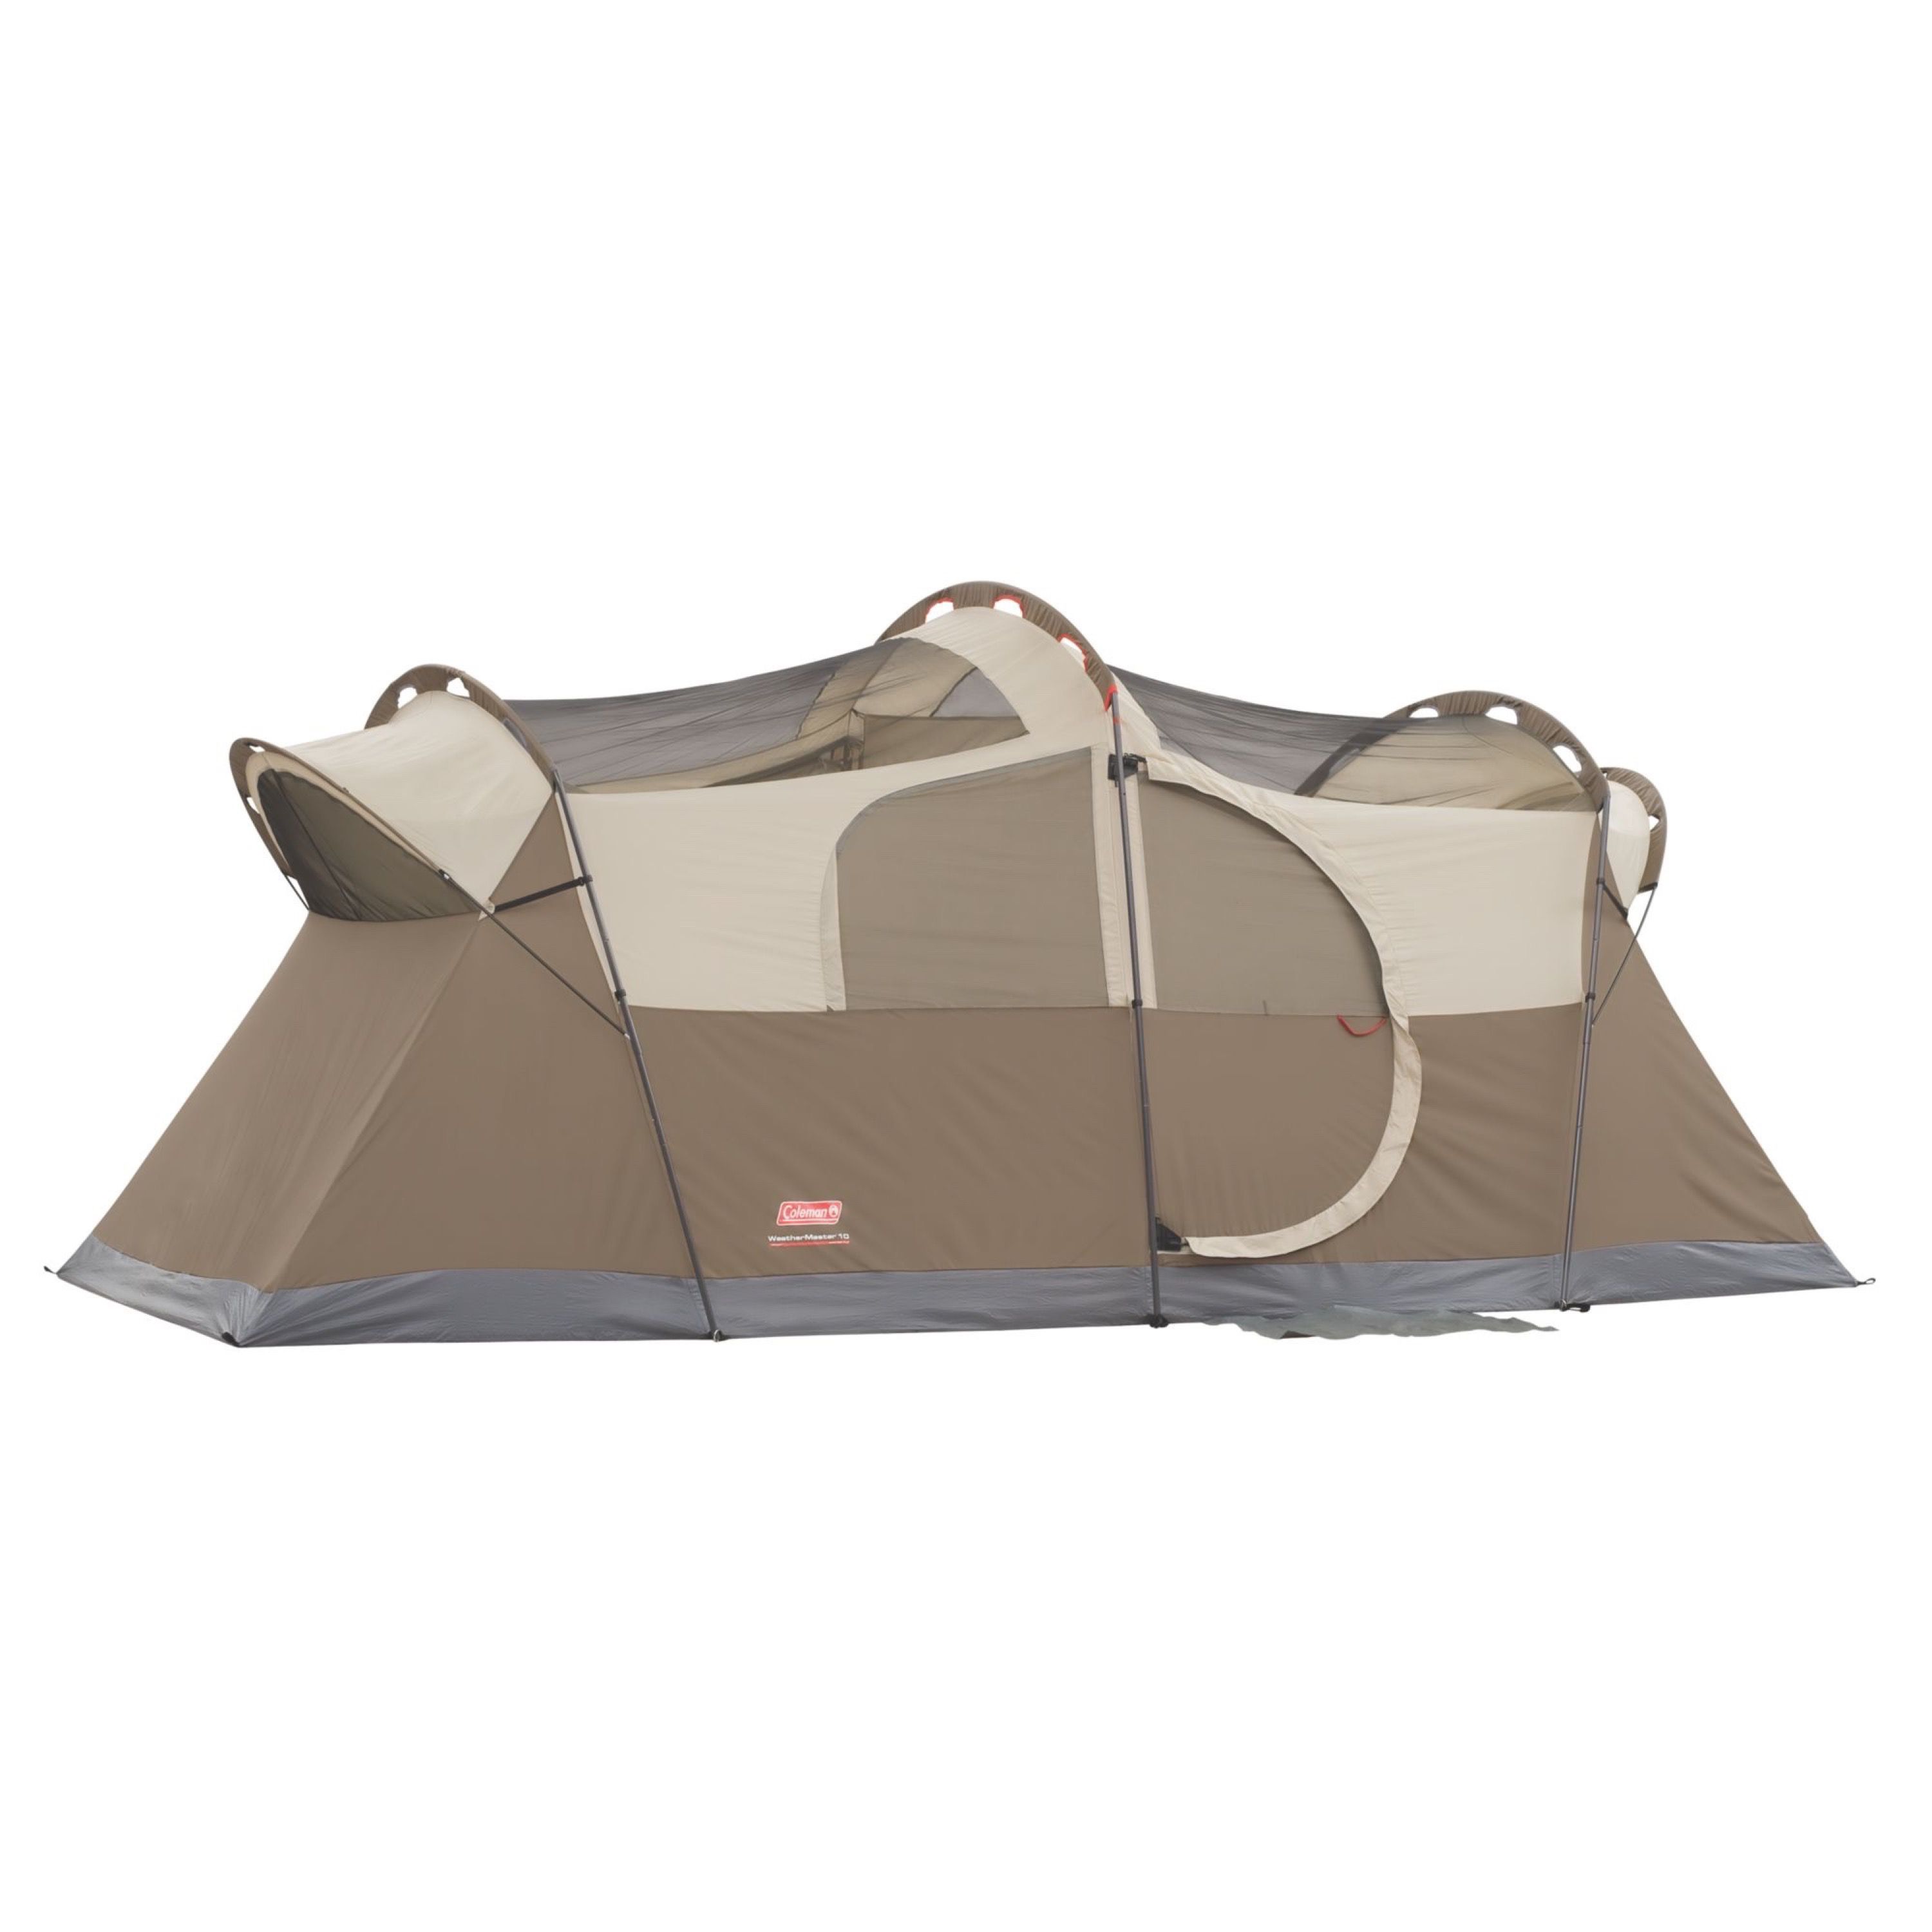 Coleman WeatherMaster 10 Person Tent with Room Divider - image 2 of 7